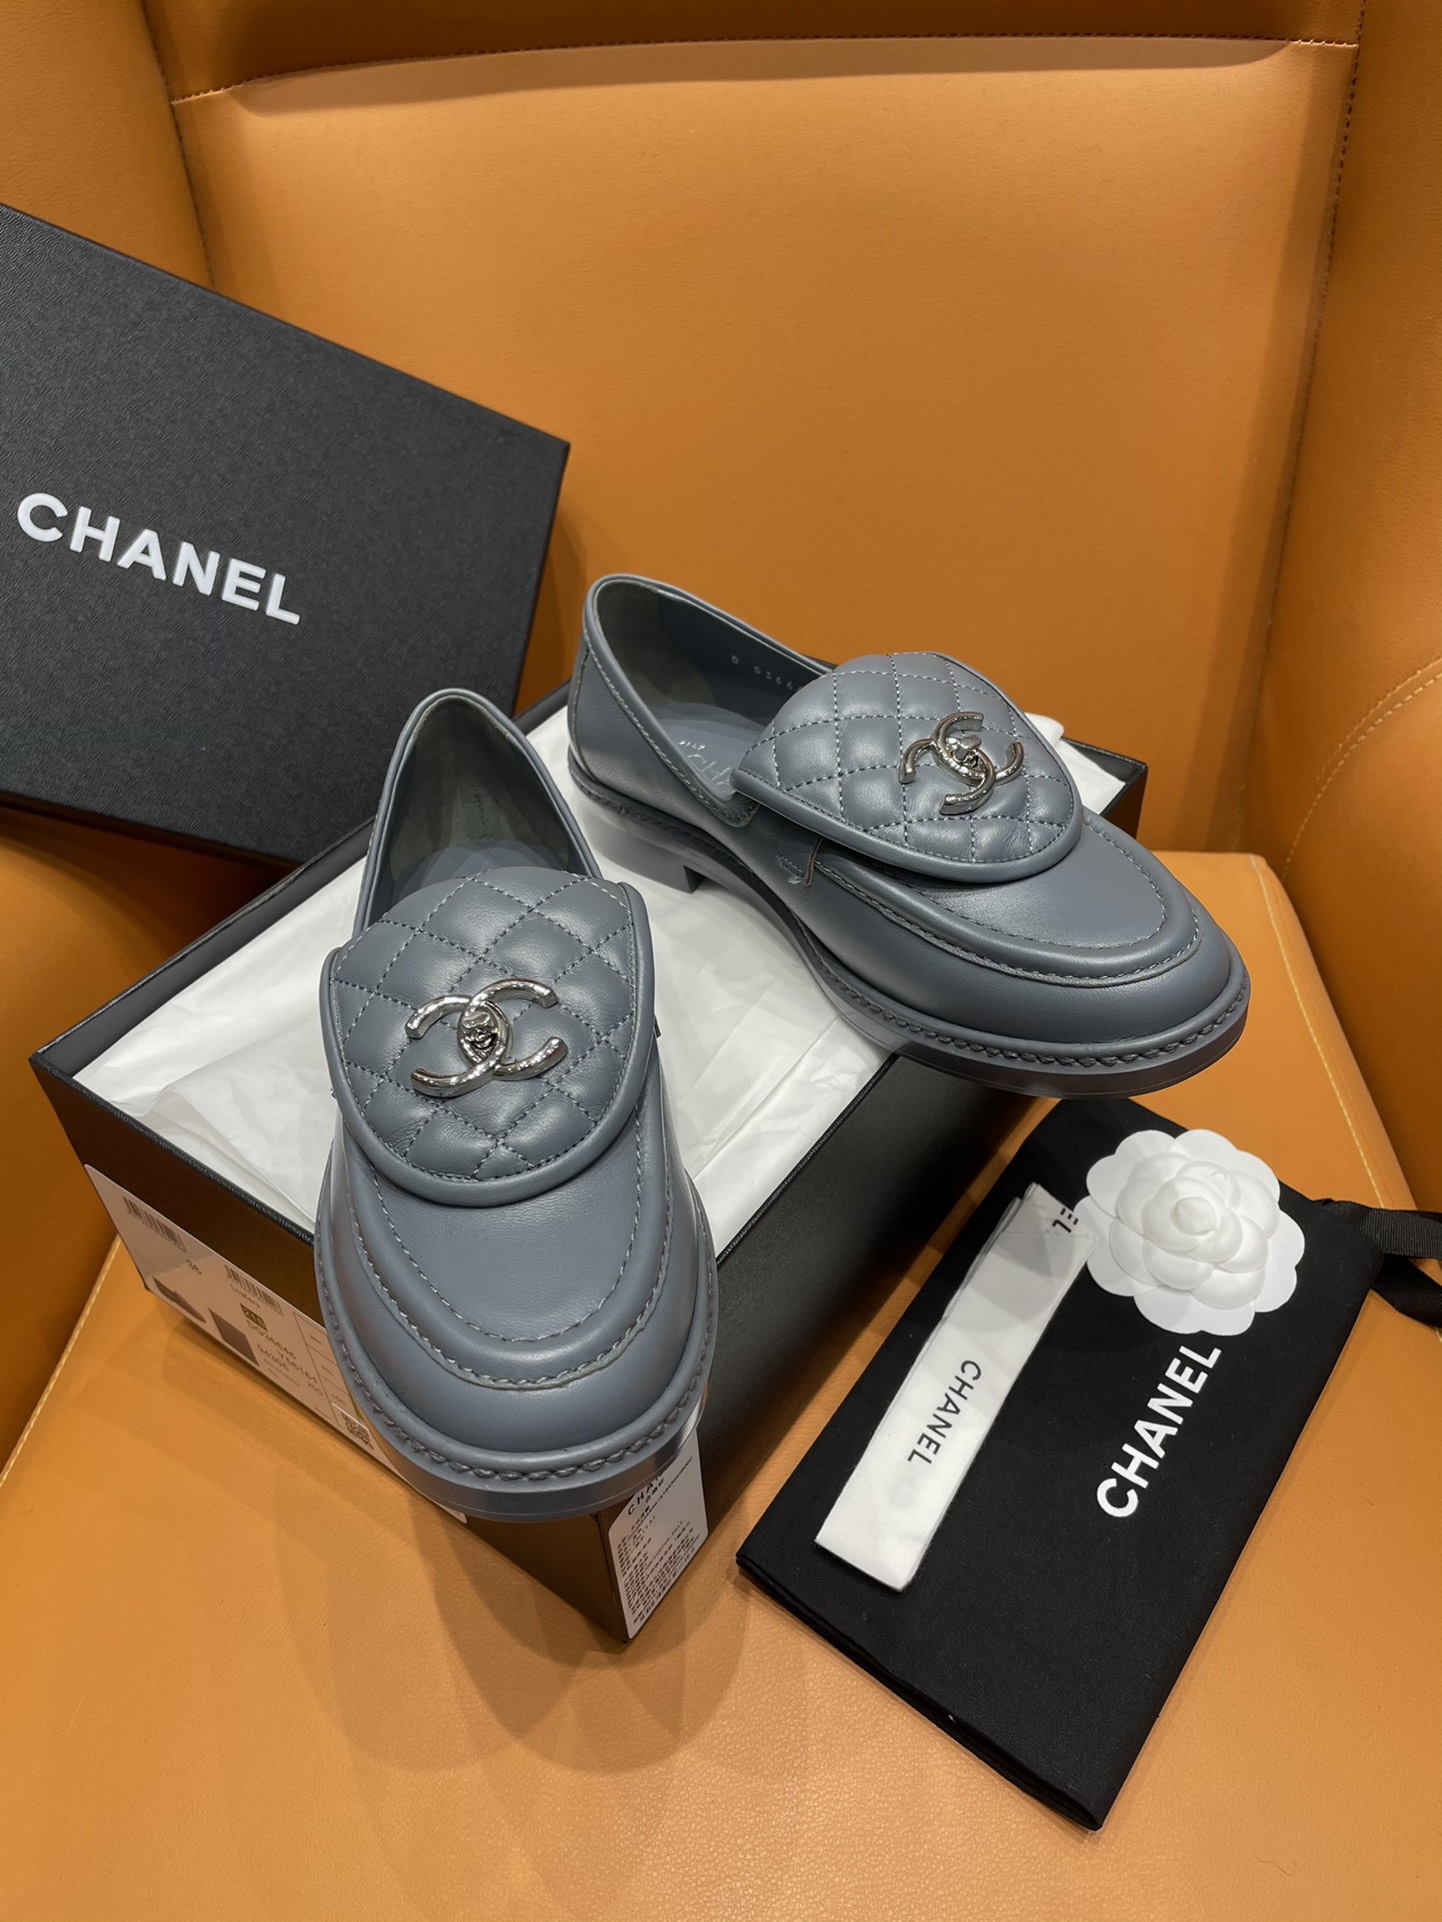 Chanel Shoes Loafers Black Grey White Embroidery Genuine Leather Lambskin Sheepskin Vintage